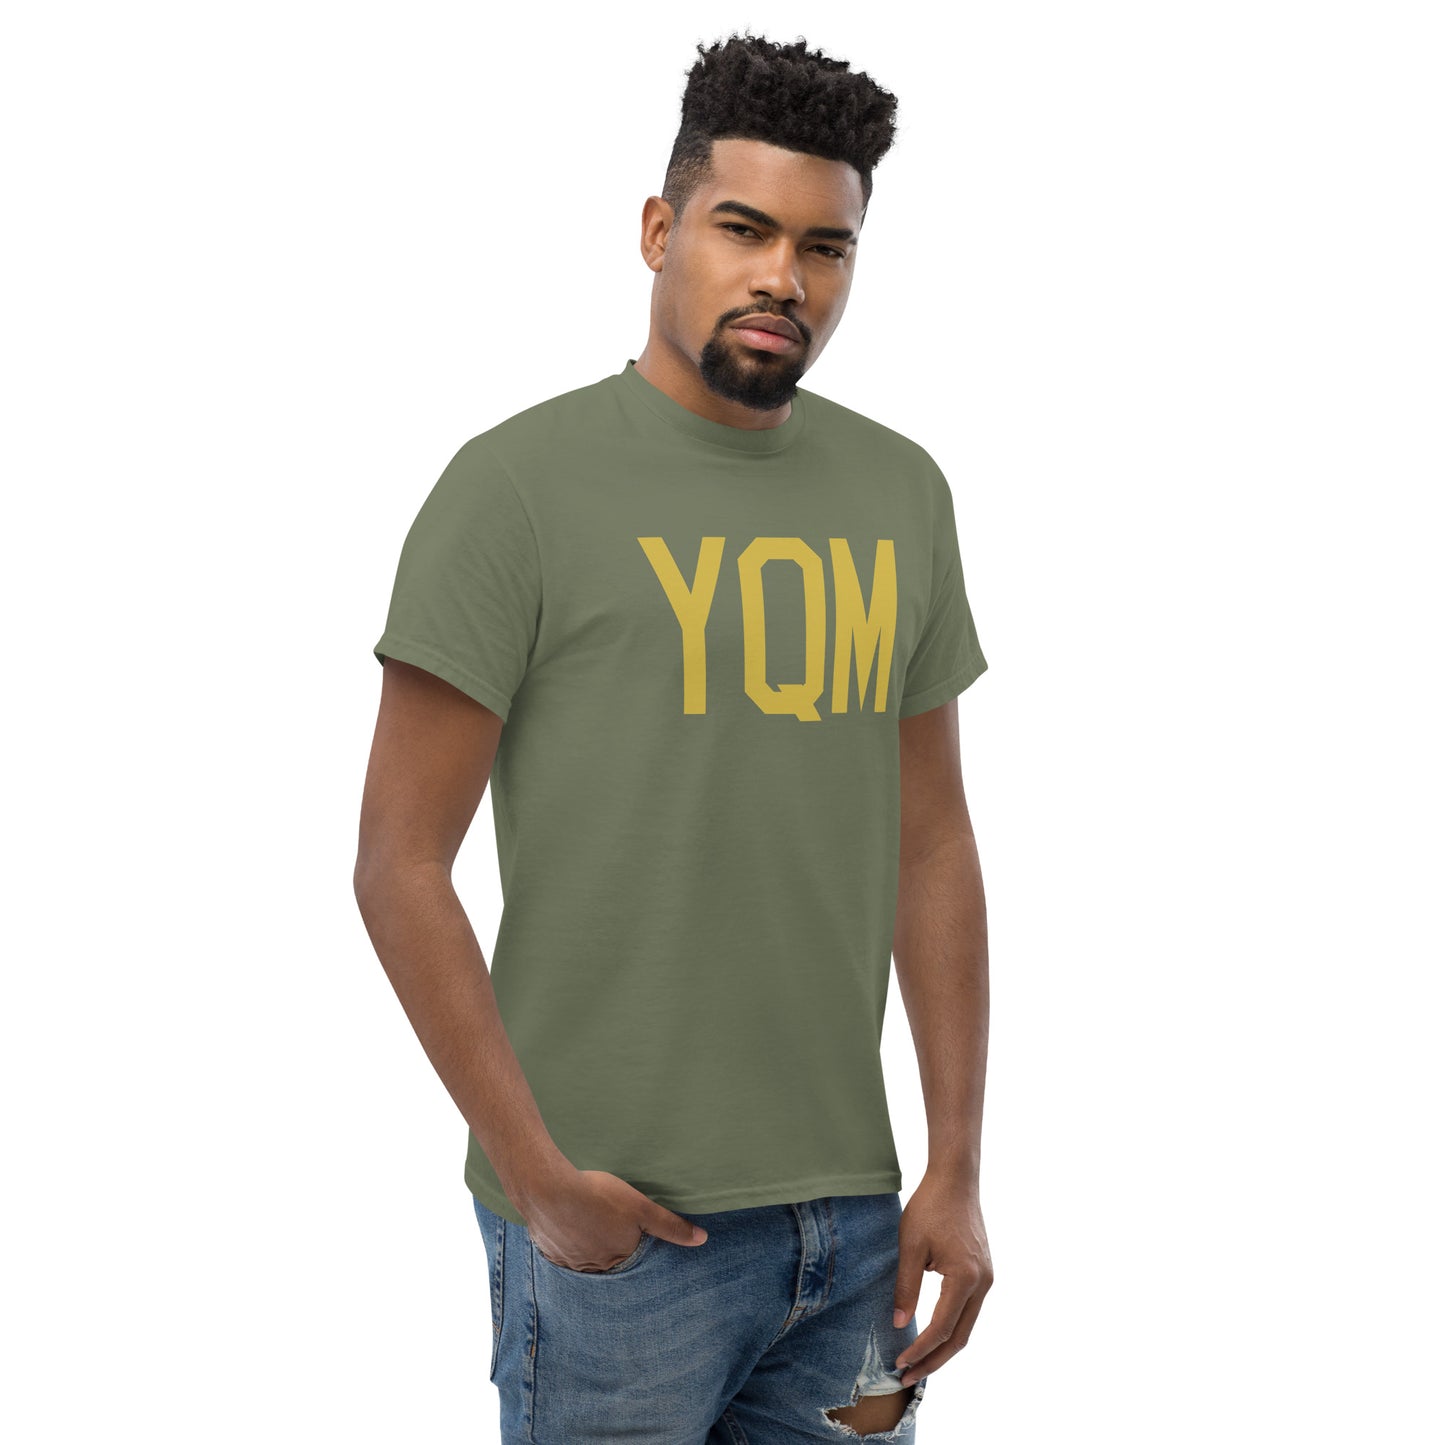 Aviation Enthusiast Men's Tee - Old Gold Graphic • YQM Moncton • YHM Designs - Image 08